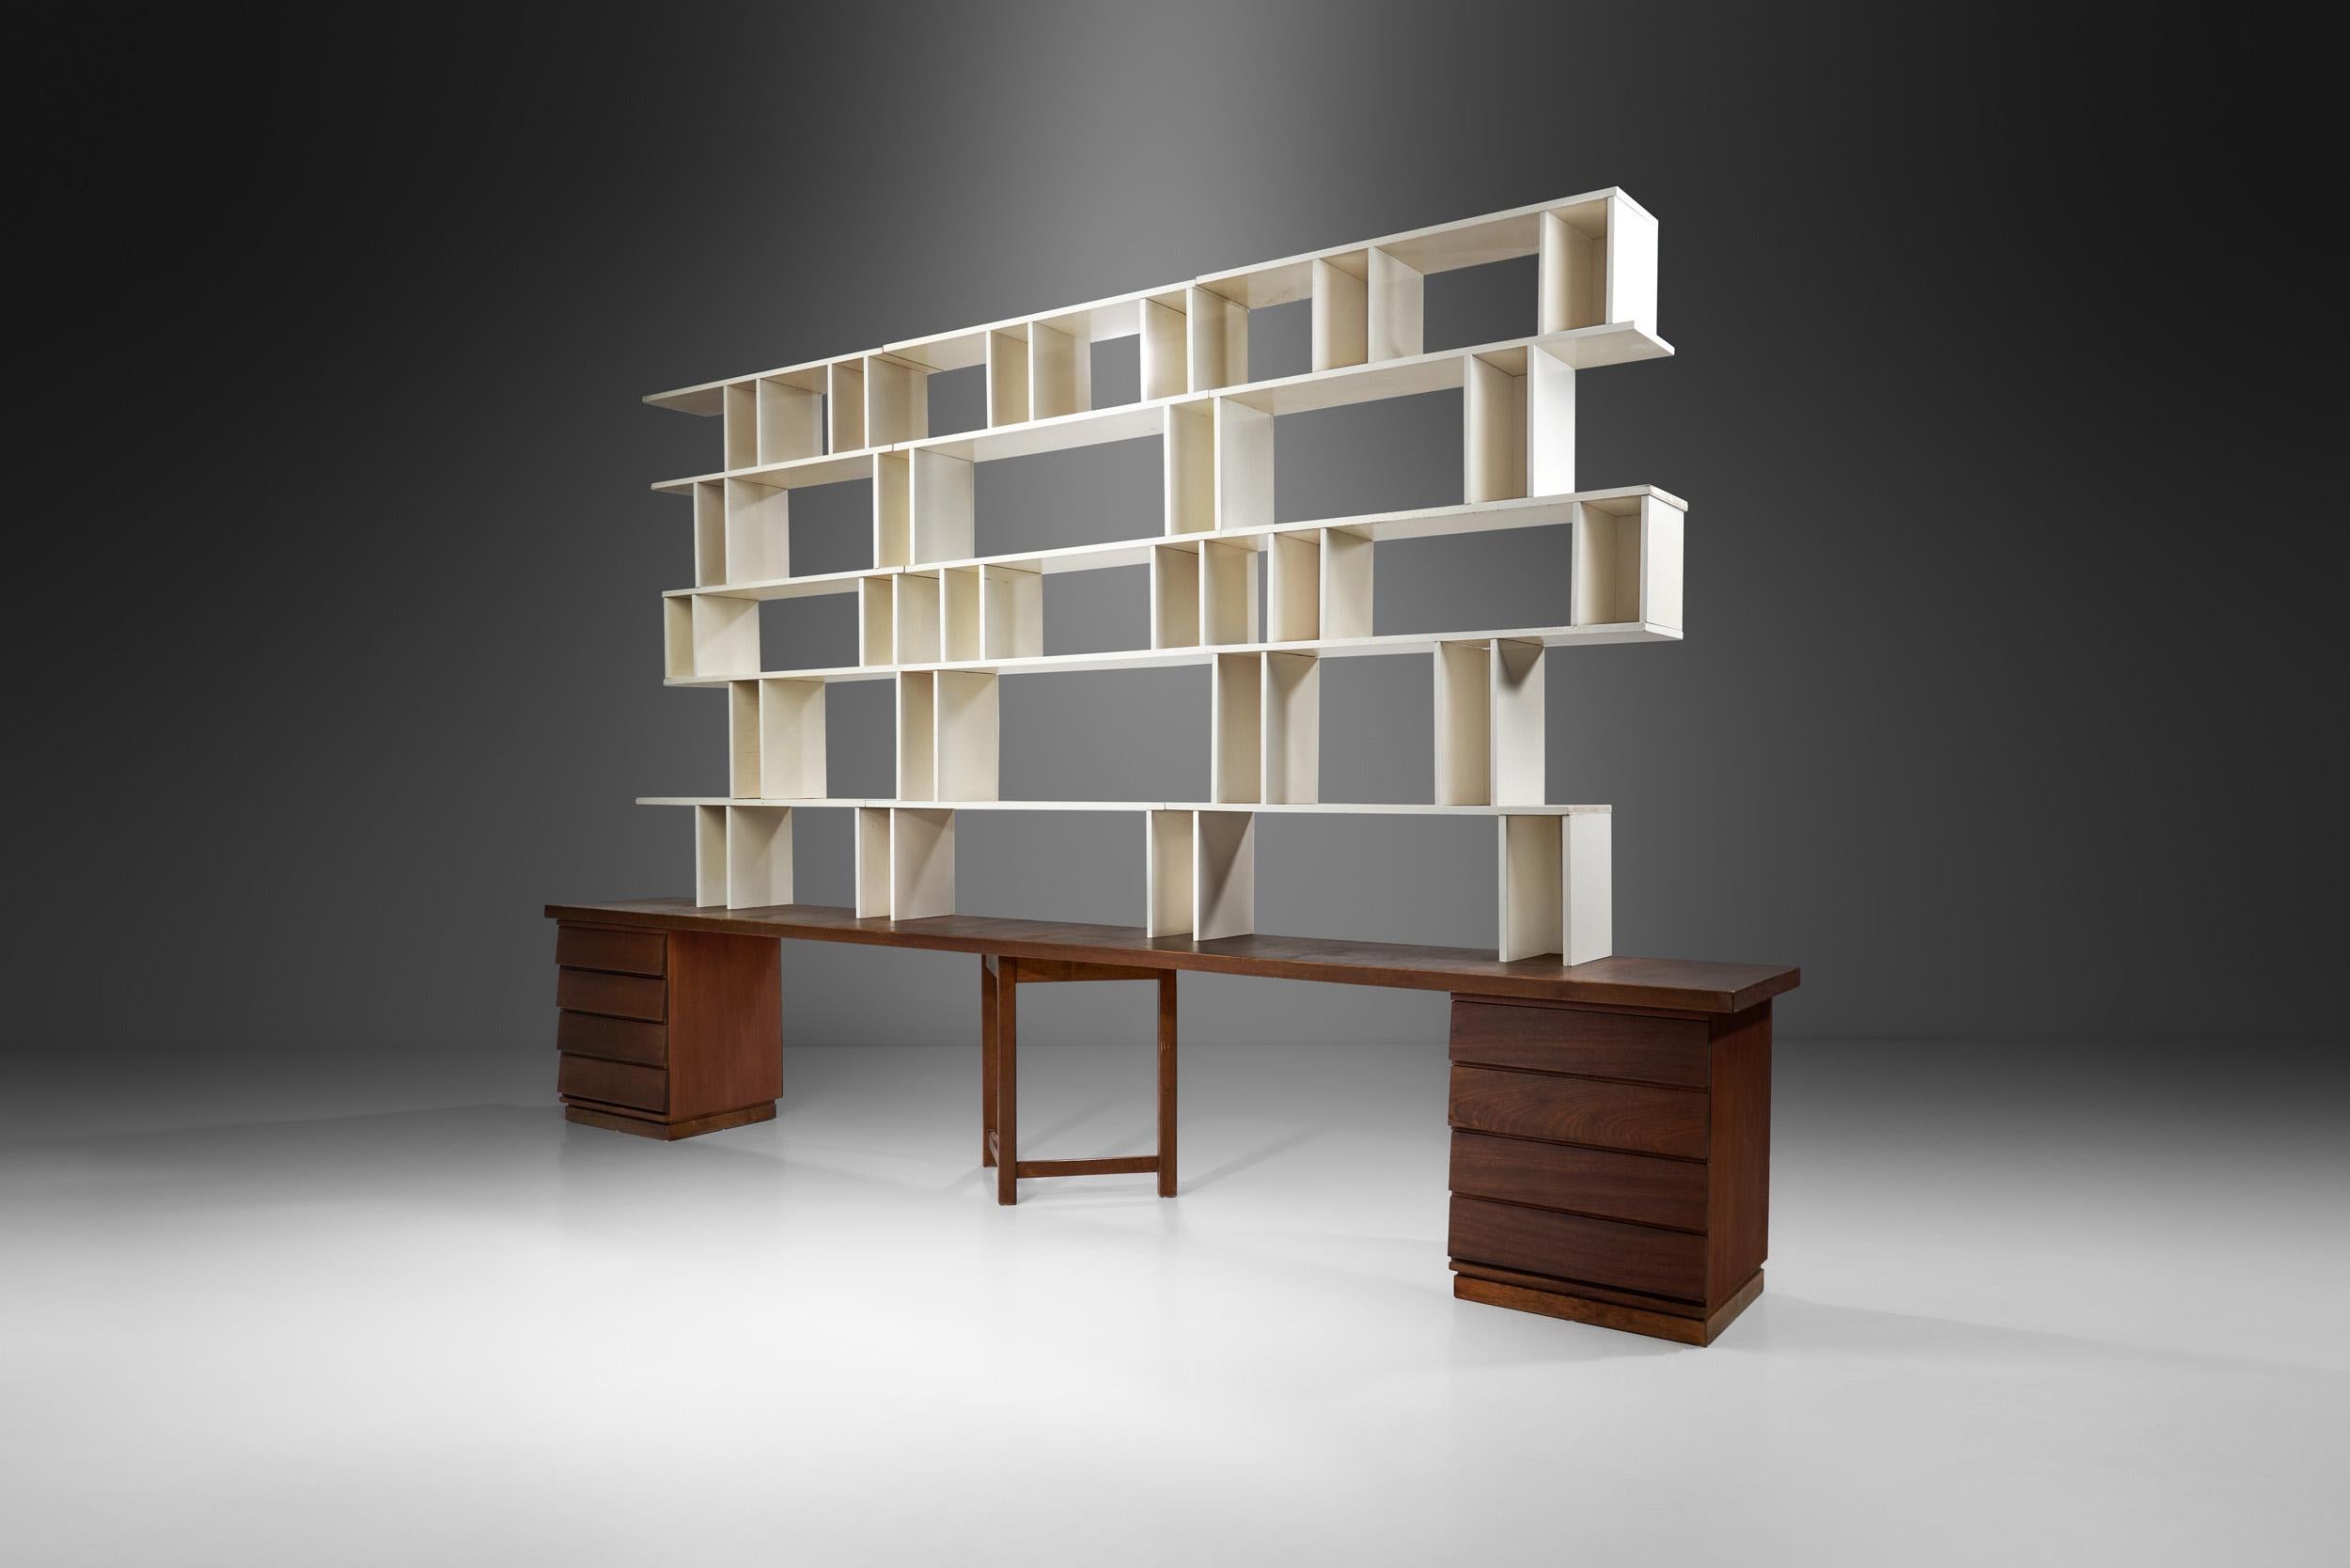 This “Välipala” shelf is, for a lack of better words, stunning. The versatile modular system is eye-catching for its unique, architectural design, and for its quality materials and the craftsmanship that was required for its creation. 

This